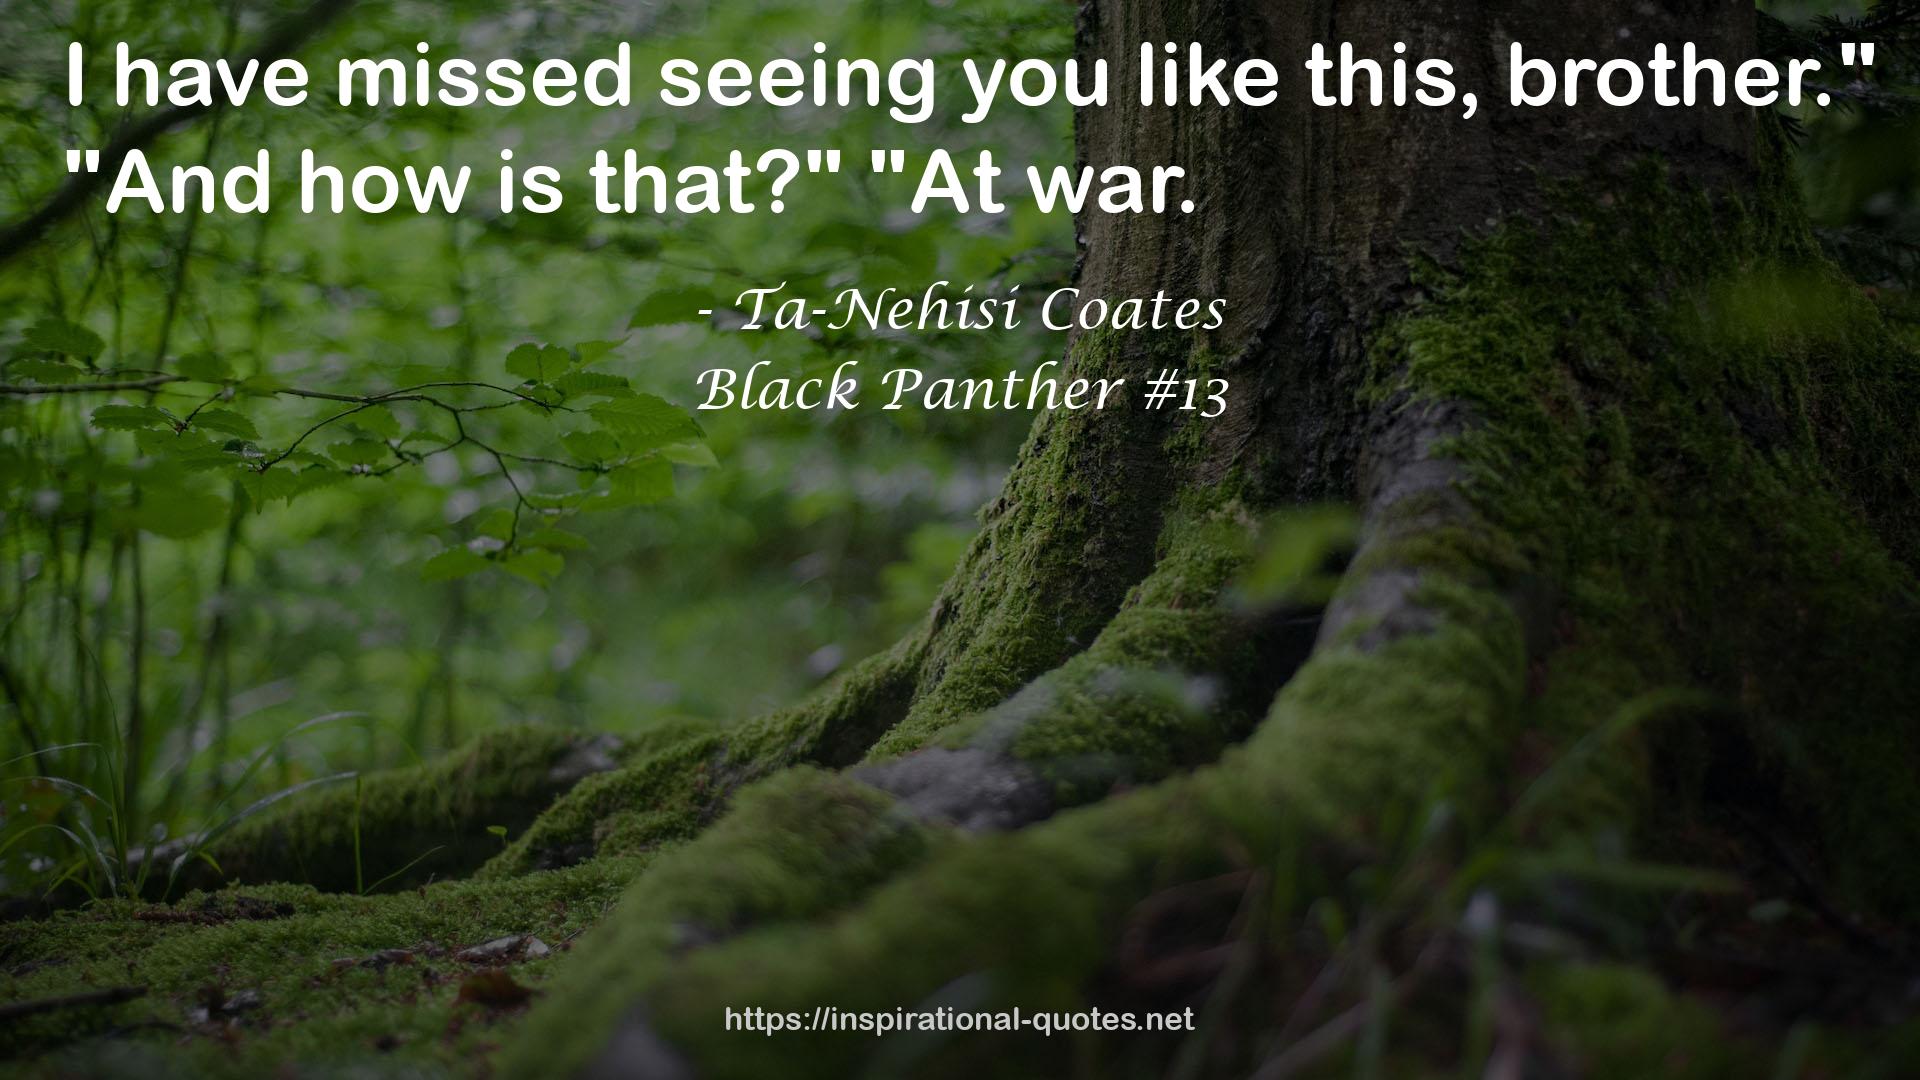 Black Panther #13 QUOTES